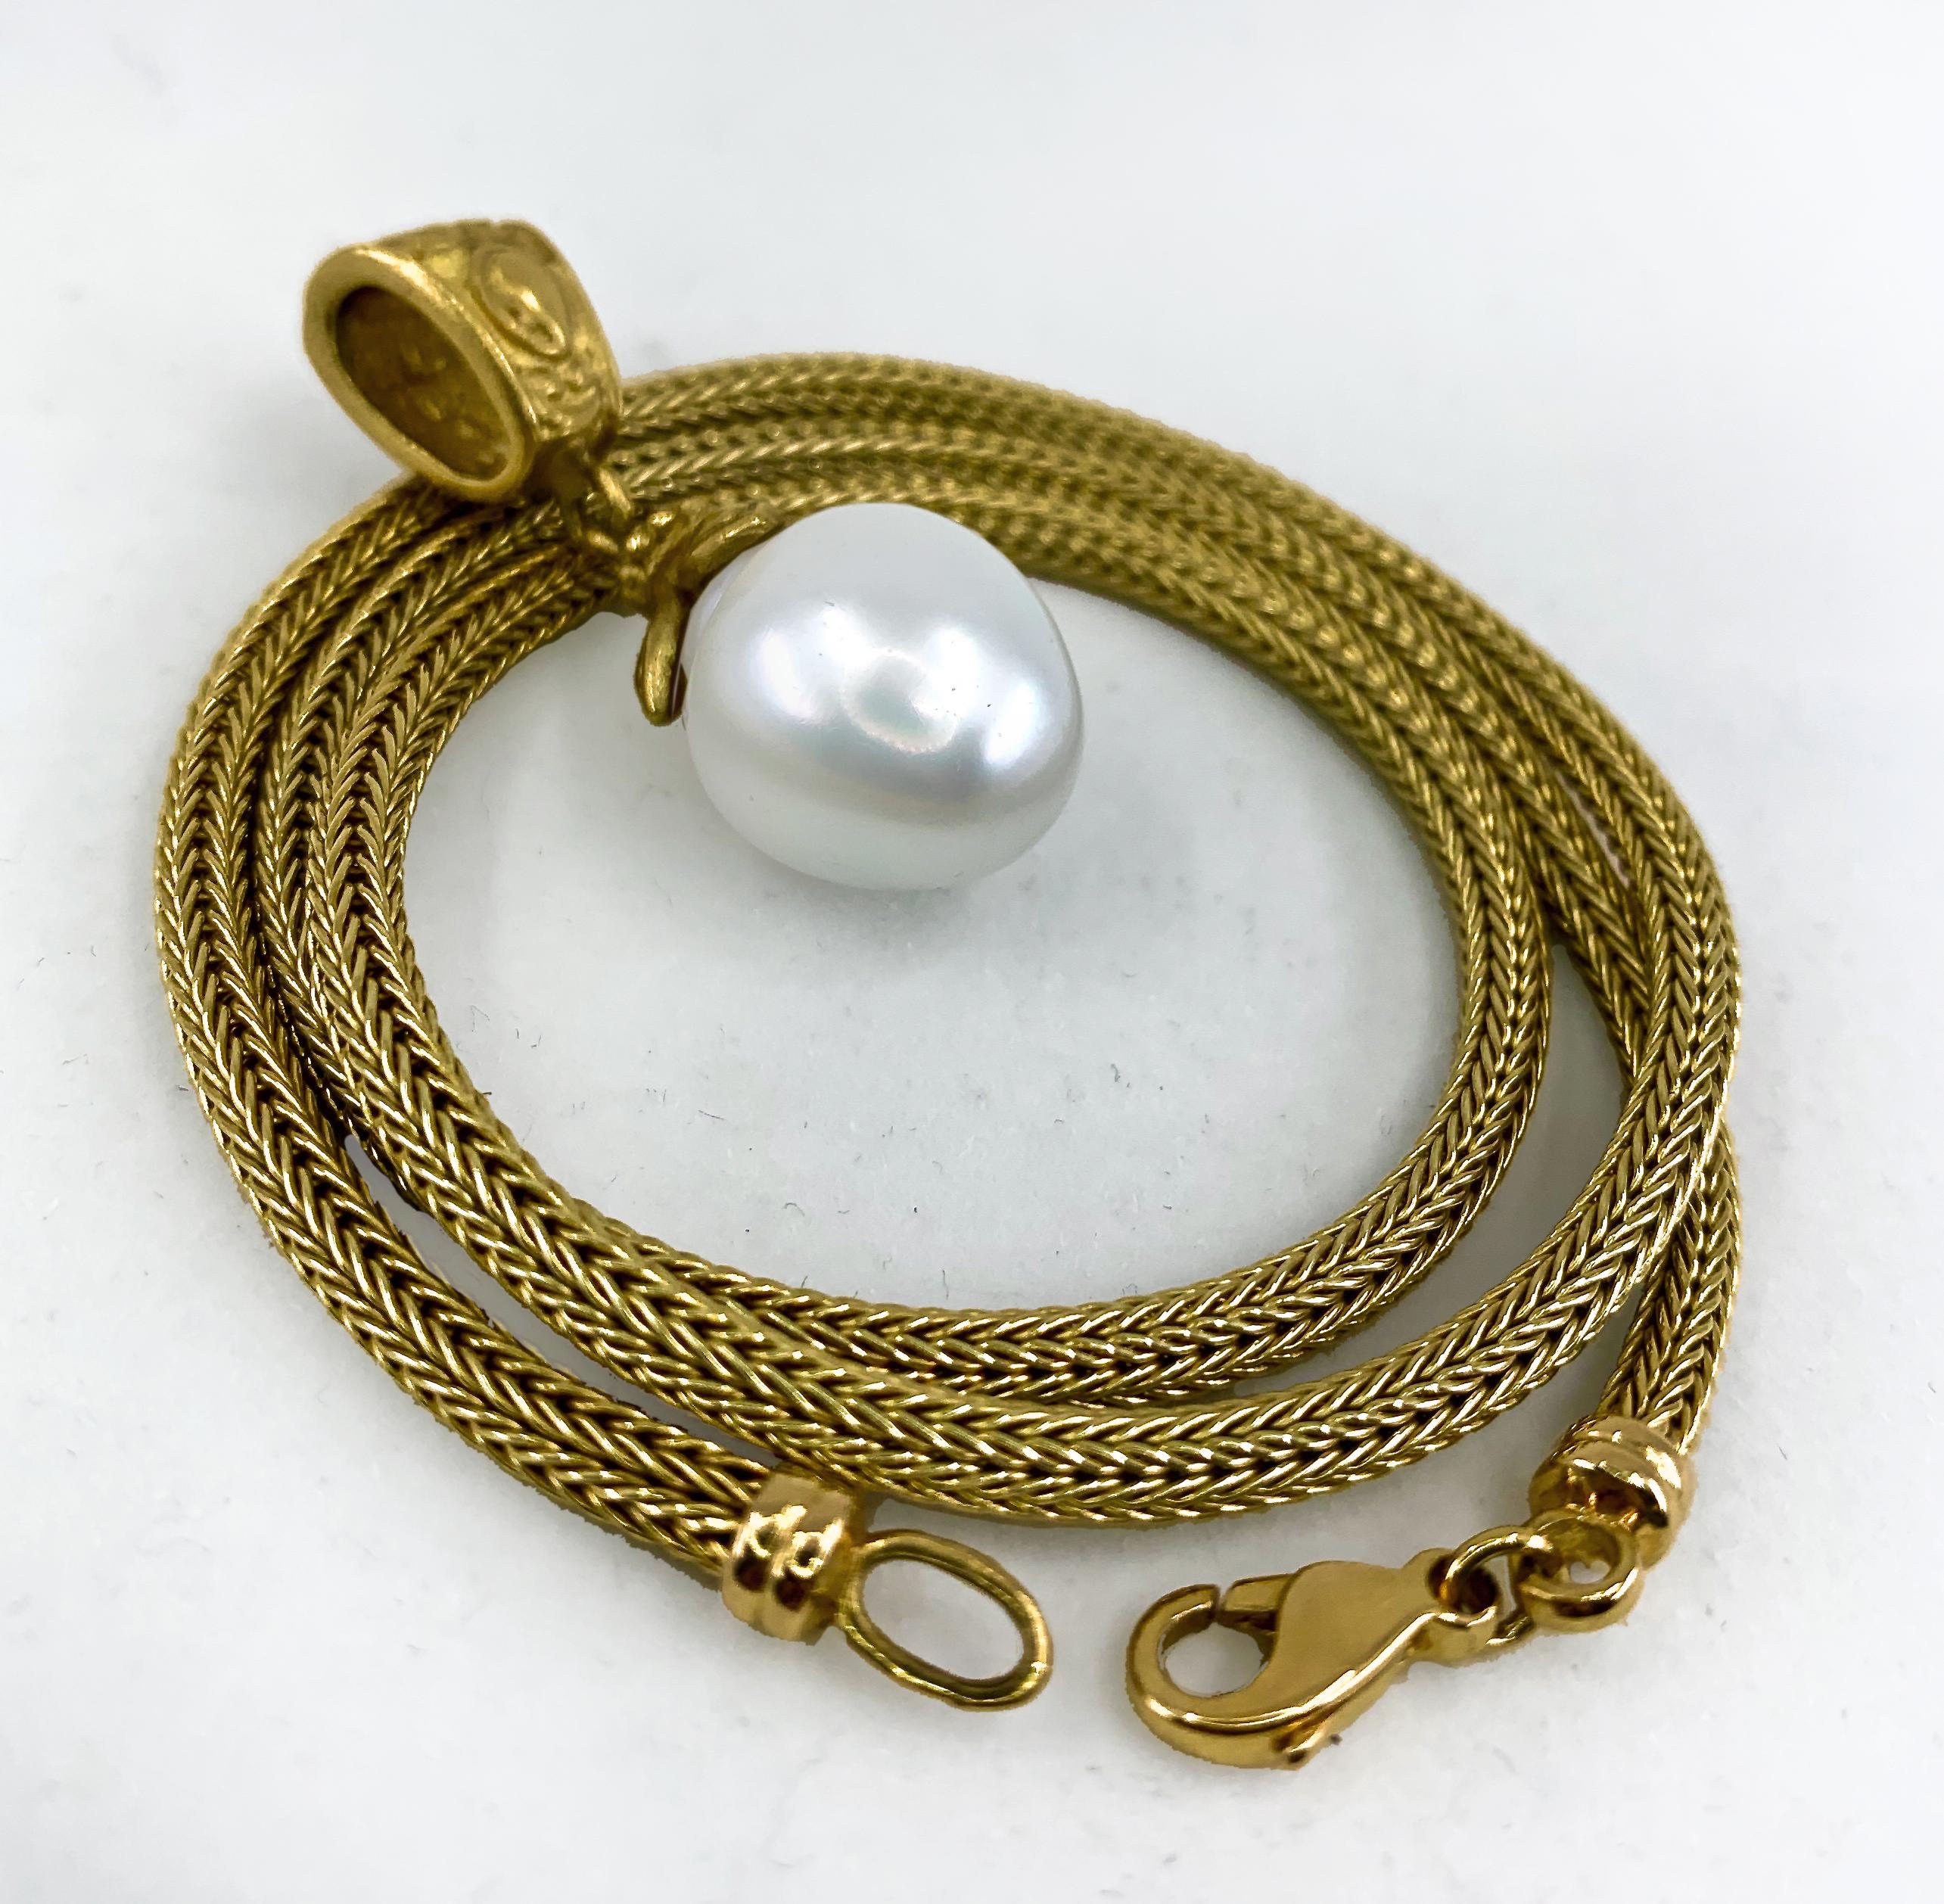 This large (13.5mm), lustrous white South Sea pearl is set on a Byzantine-flavored 18 karat yellow gold pedant handmade in our shop by Eytan Brandes.  It is perfectly partnered with a thick 14 karat yellow gold wheat chain.  

The pearl is 13.5mm in